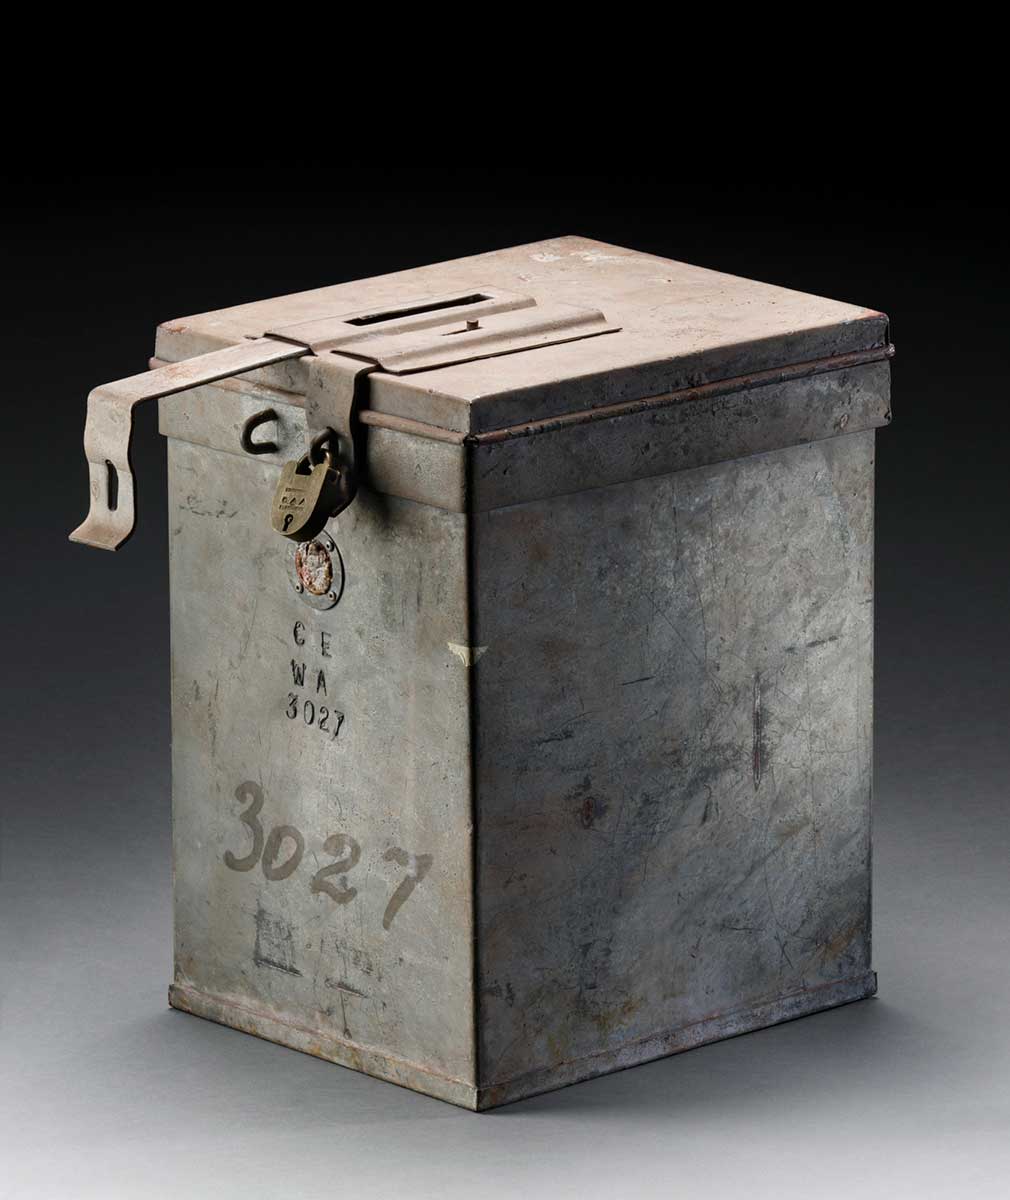 A rectangular, galvanised metal voting box with a hinged lid. The lid has two metal hasp closures, one of which has a brass padlock attached, with a key inserted. The text 'CE / WA / 3027' is inscribed on the front of the box and the number '3027' is repeated in black marker.